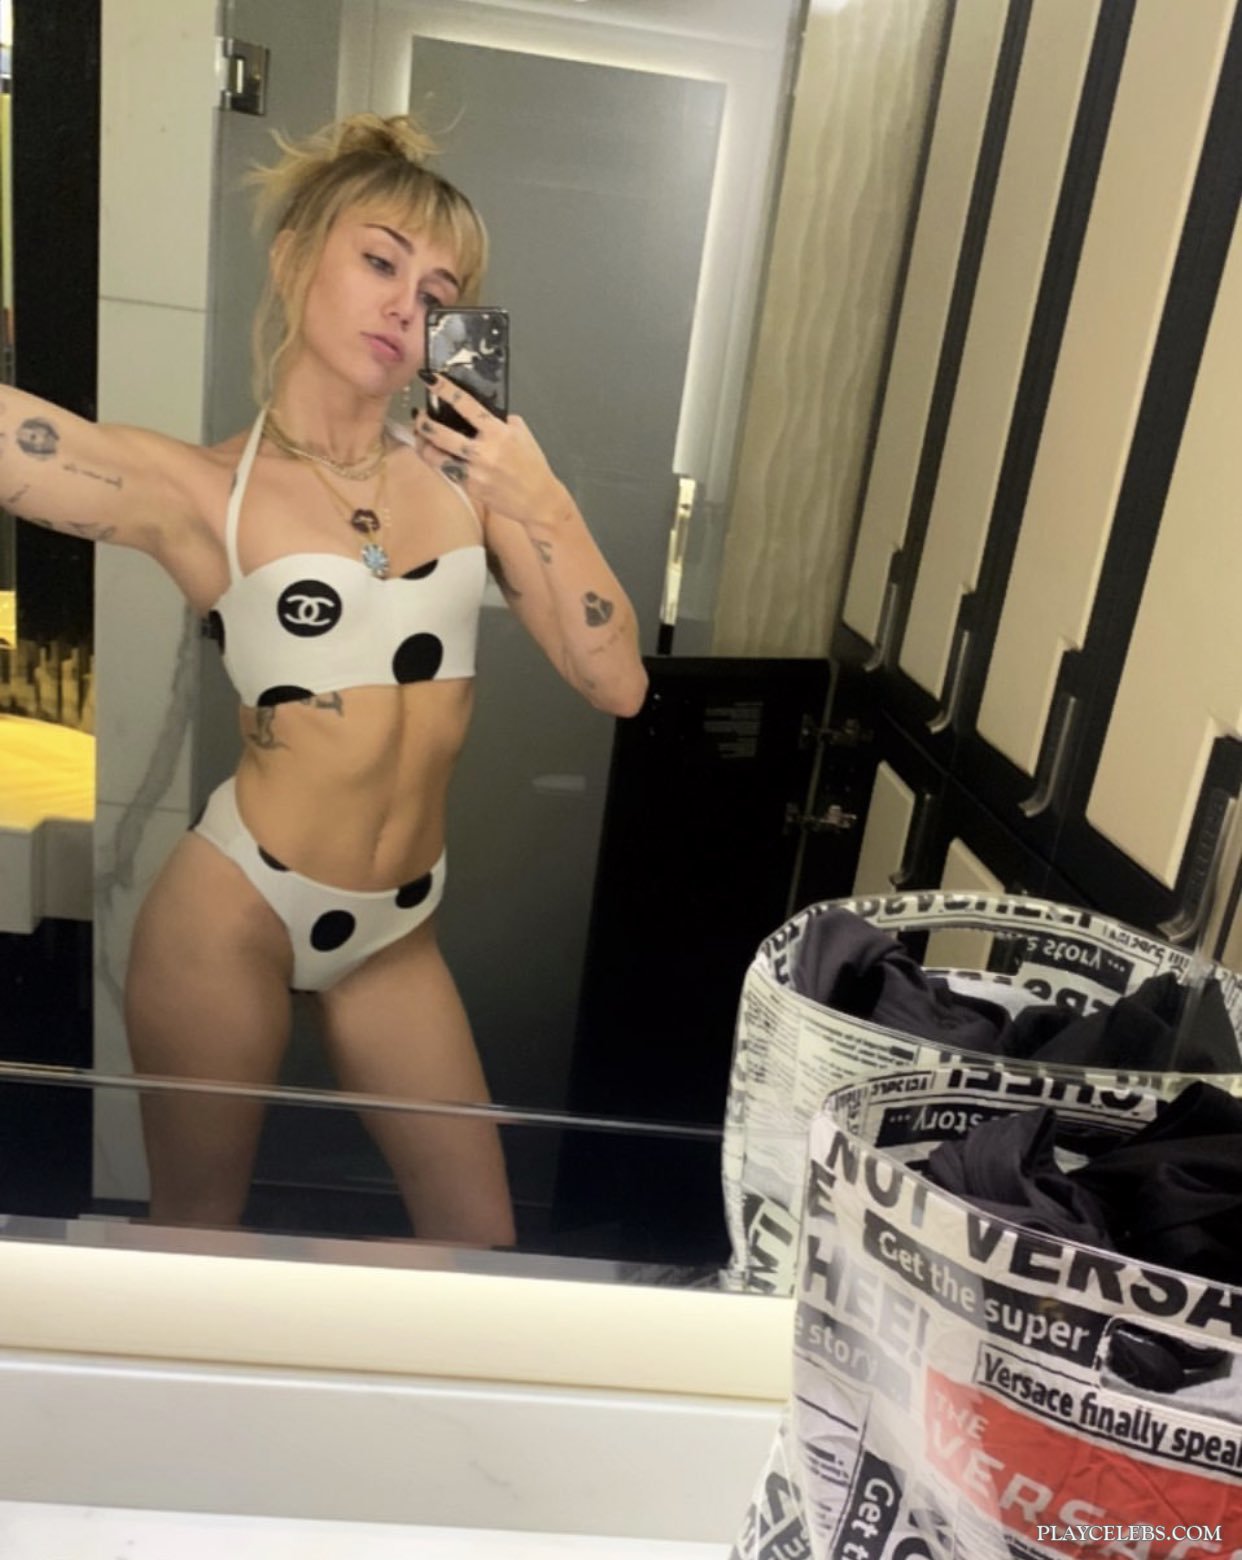 You are currently viewing Miley Cyrus Topless And New Bikini Photos